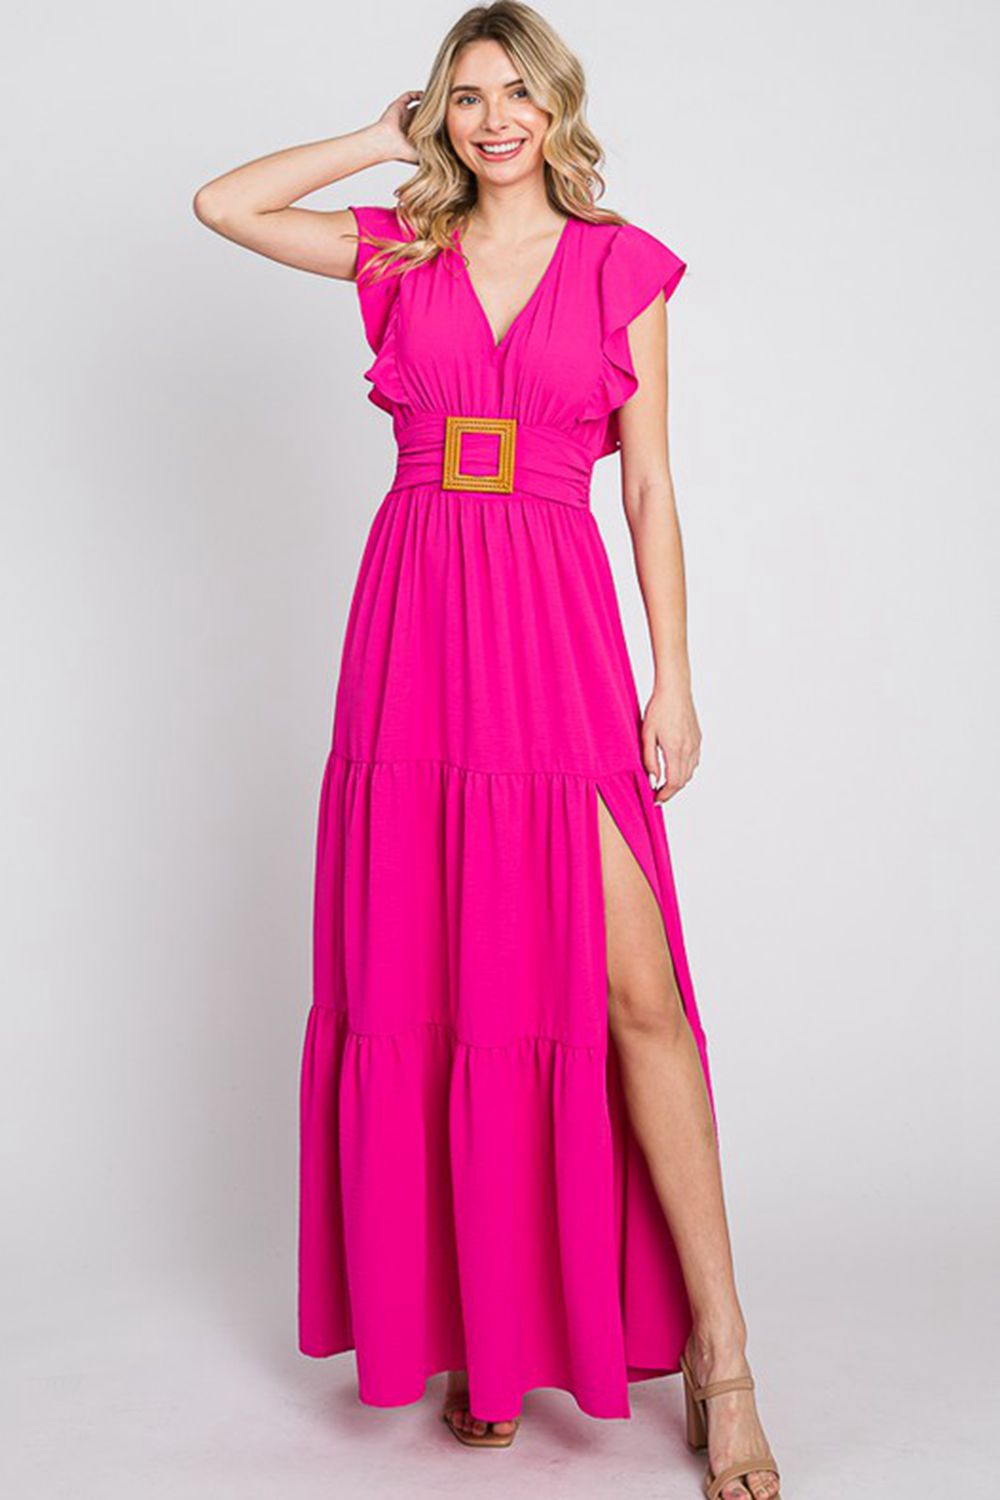 Load image into Gallery viewer, GeeGee Fancy Fizz Plus Size Tiered Side Slit Maxi Dress
